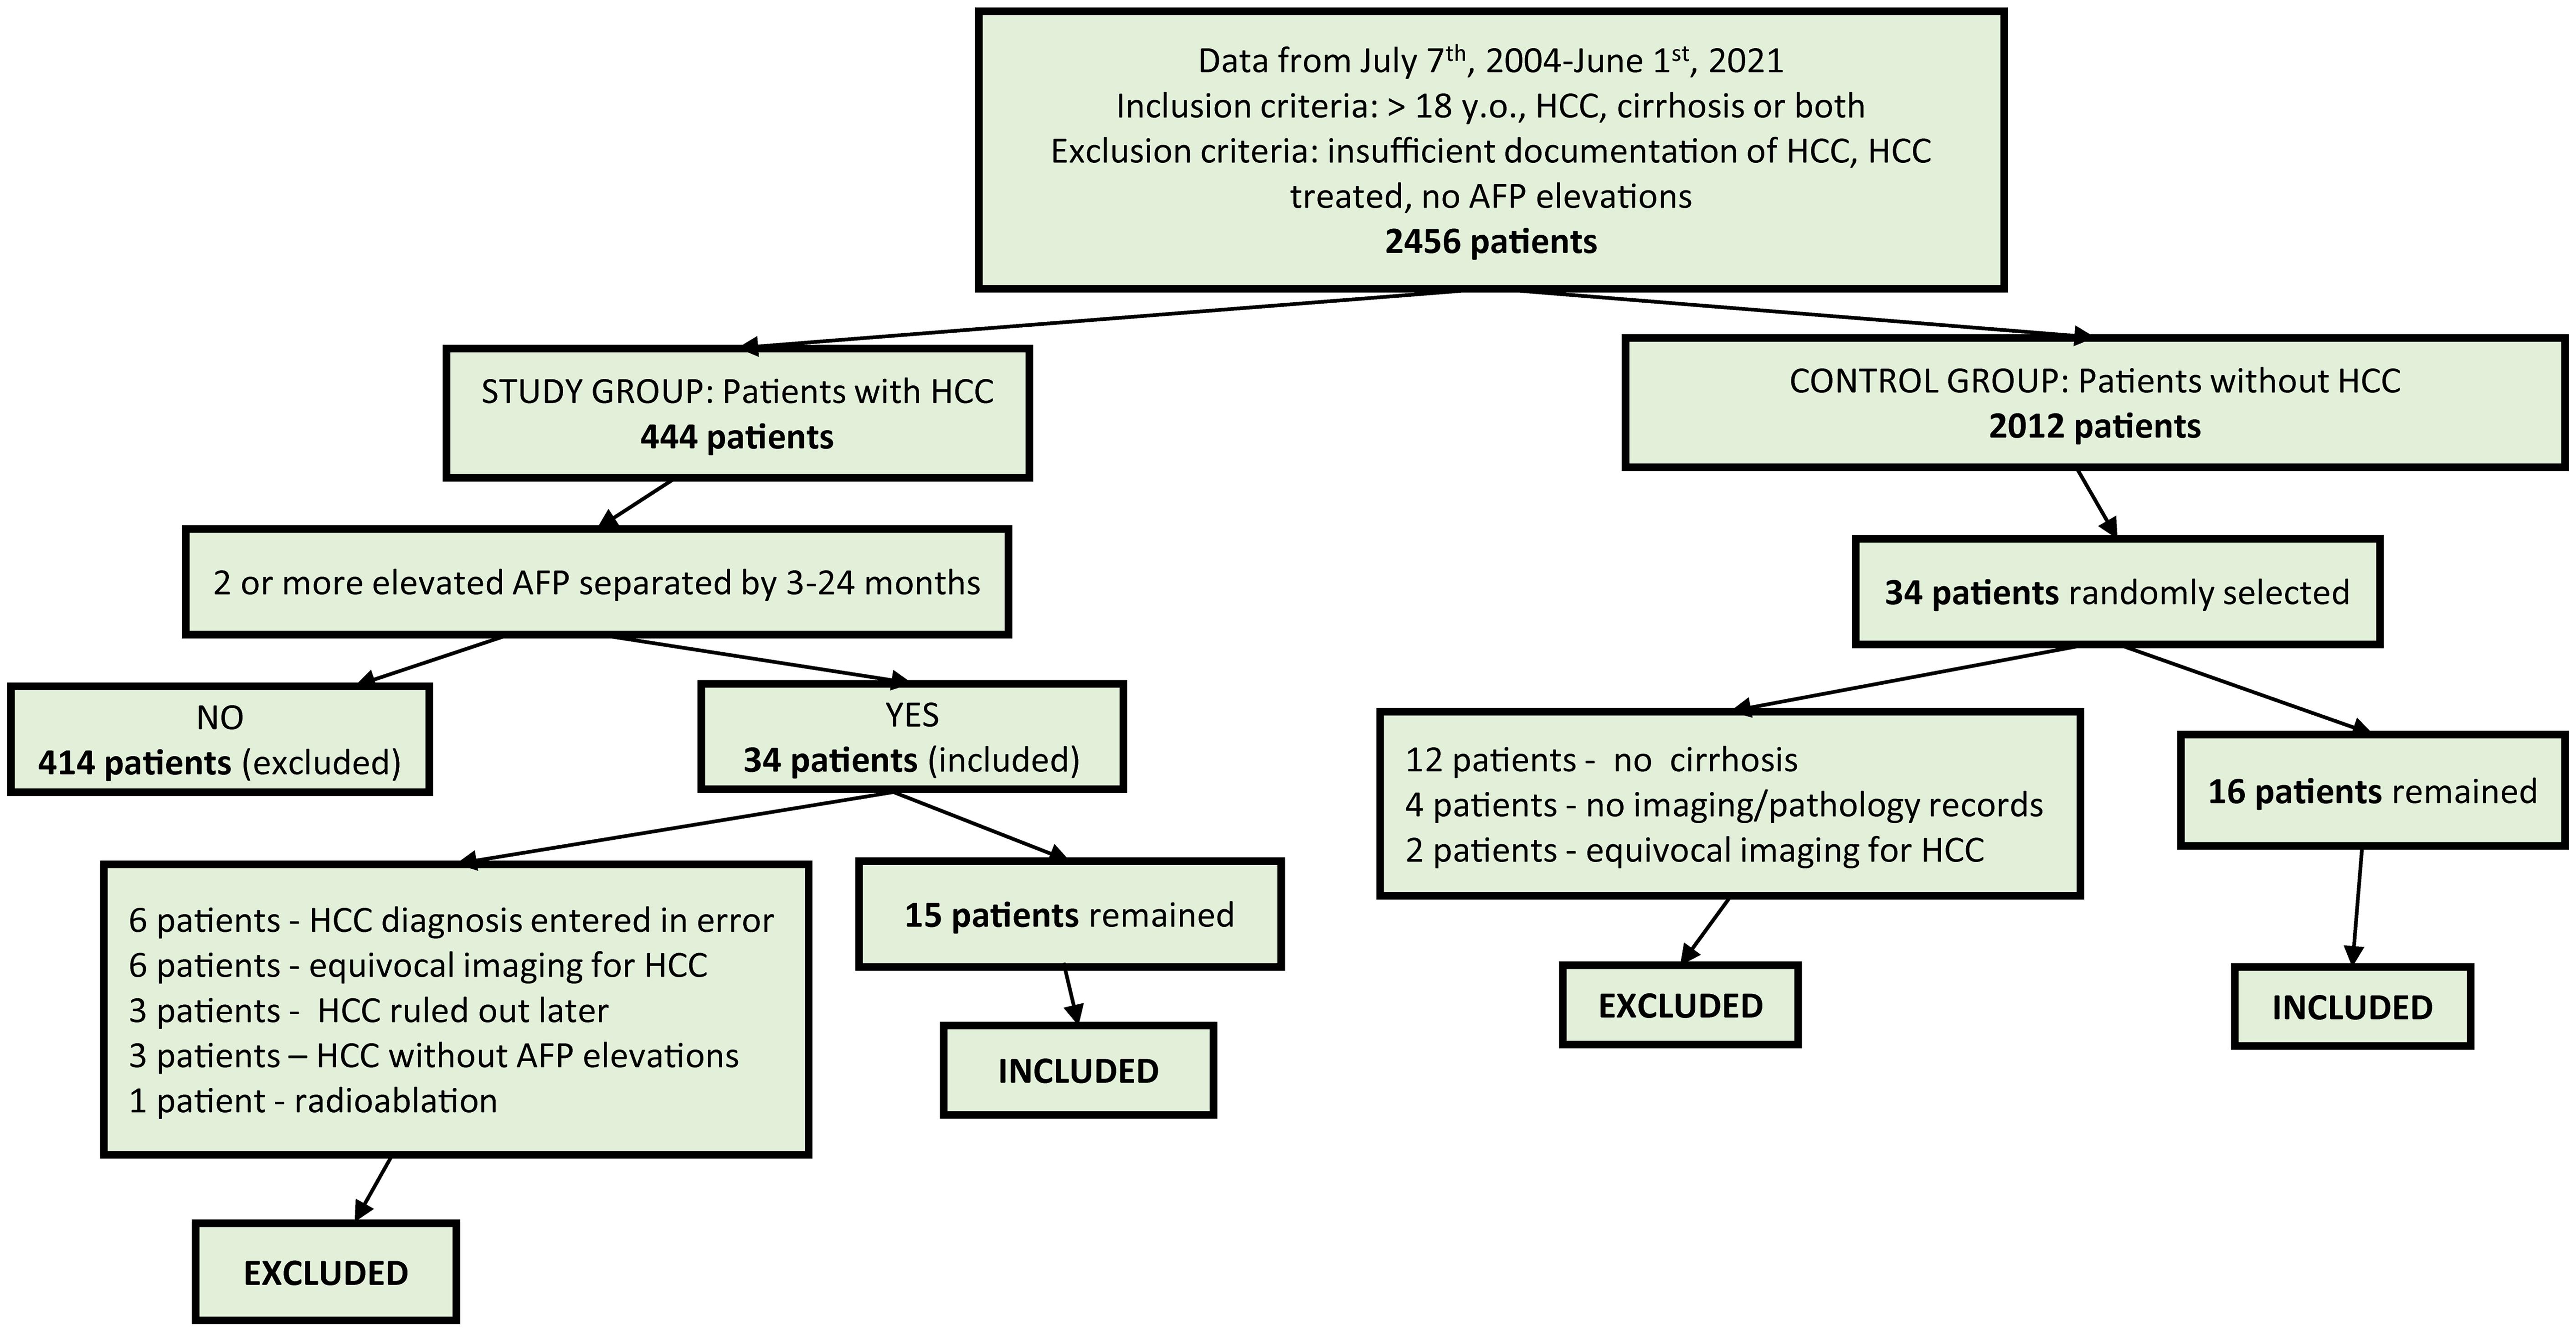 Flow diagram depicting the process by which patients were selected for inclusion in the study.